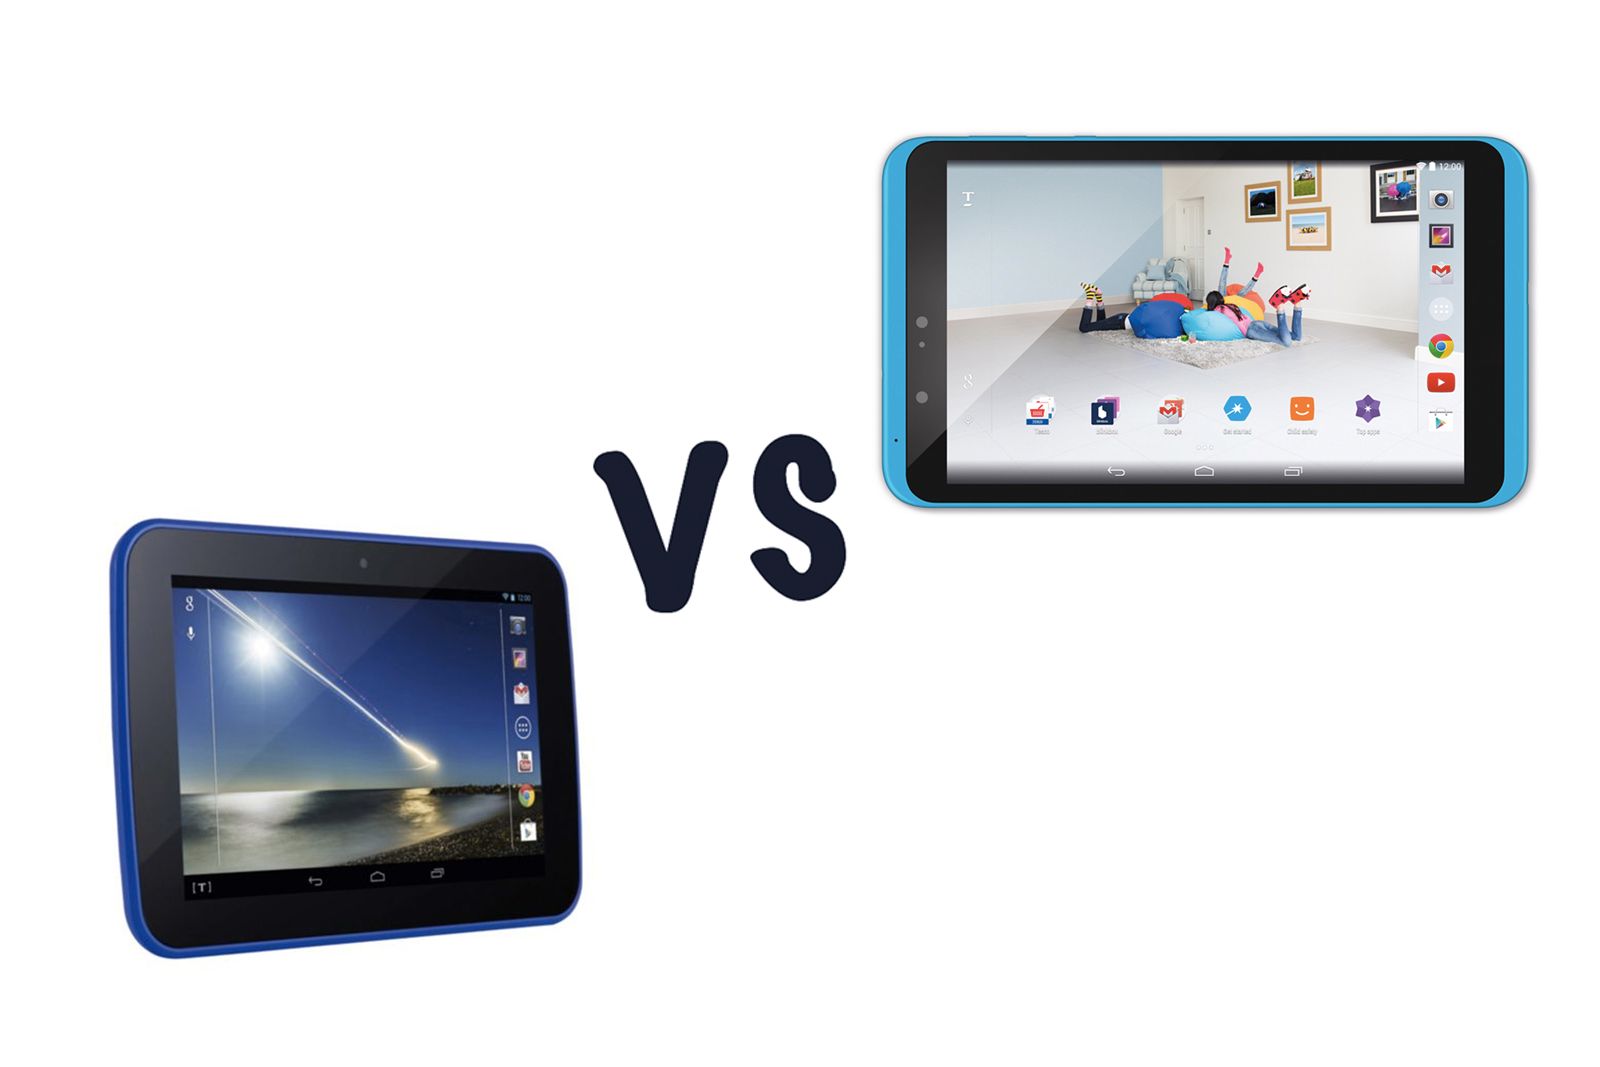 tesco hudl vs tesco hudl 2 what s the difference  image 1